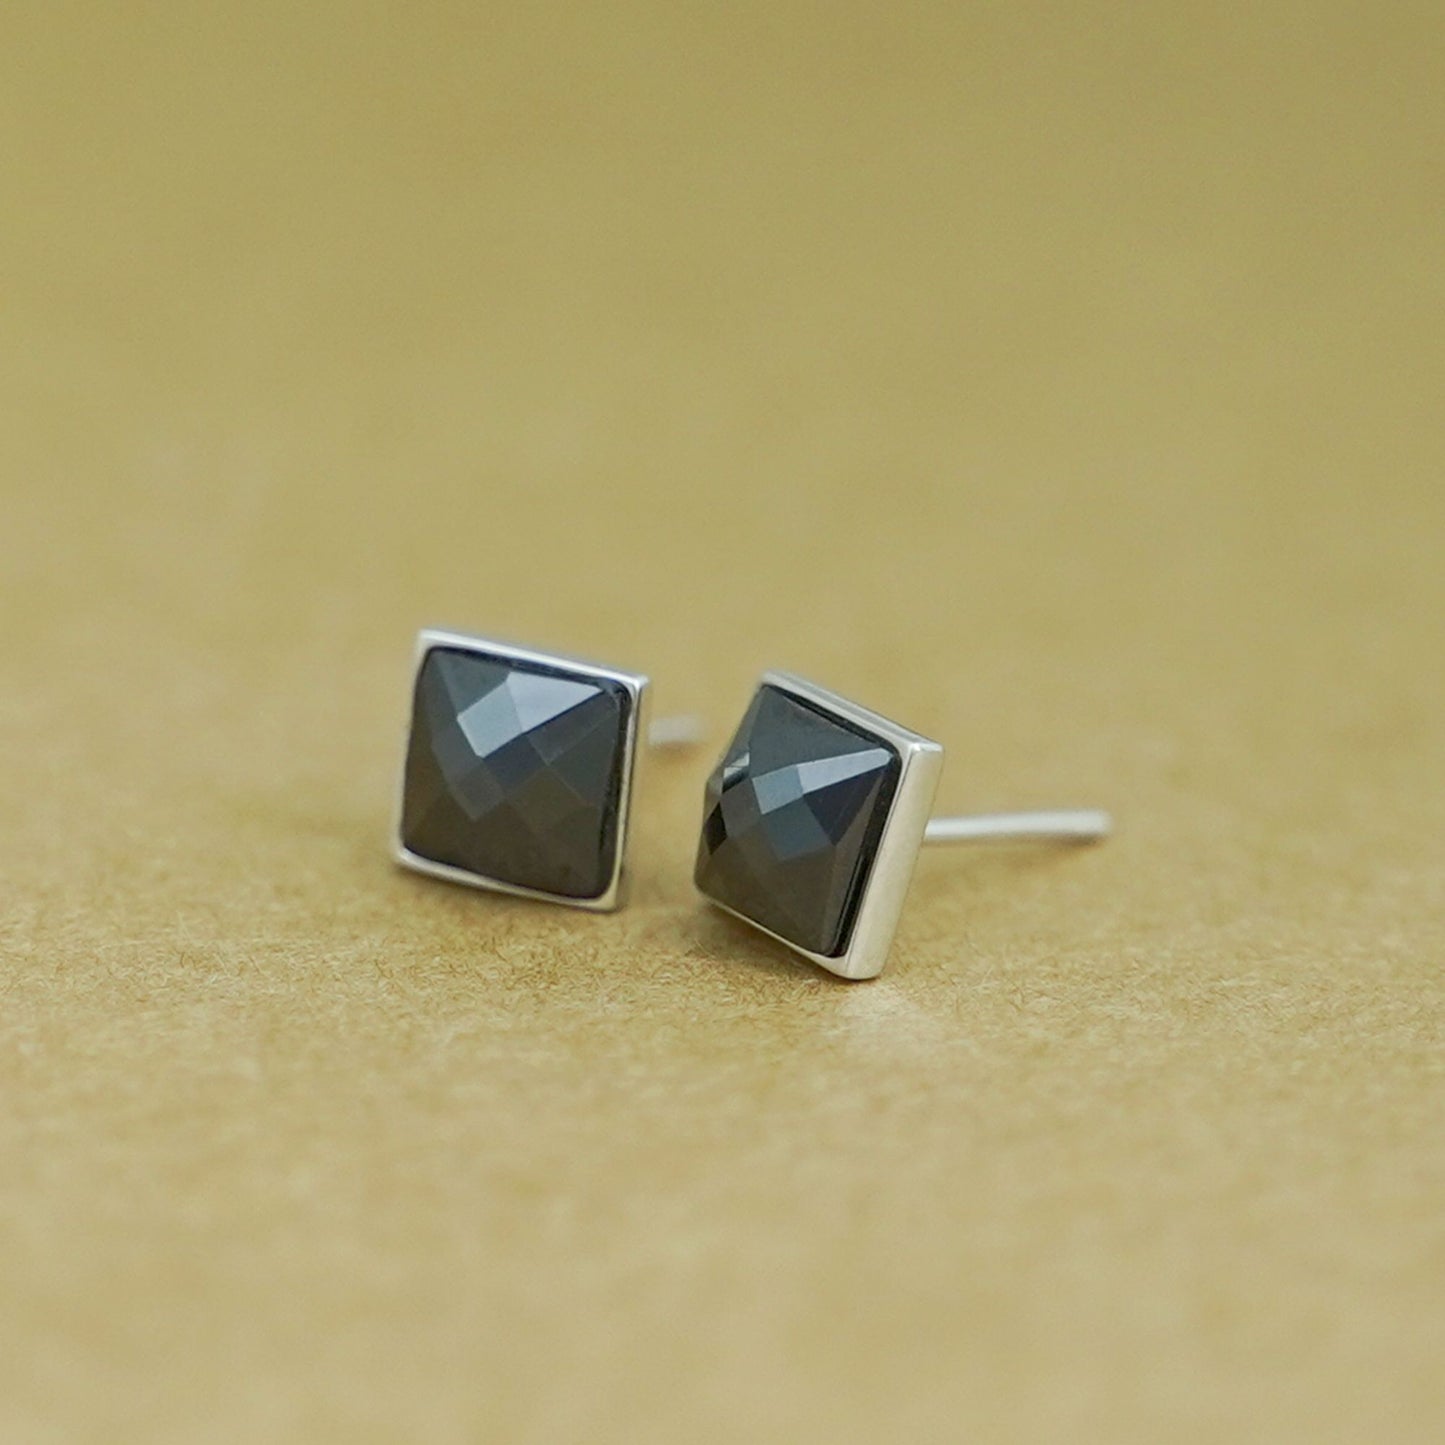 Sterling Silver Square Stud Earrings with 7mm Cut Convex Cubic Zirconia